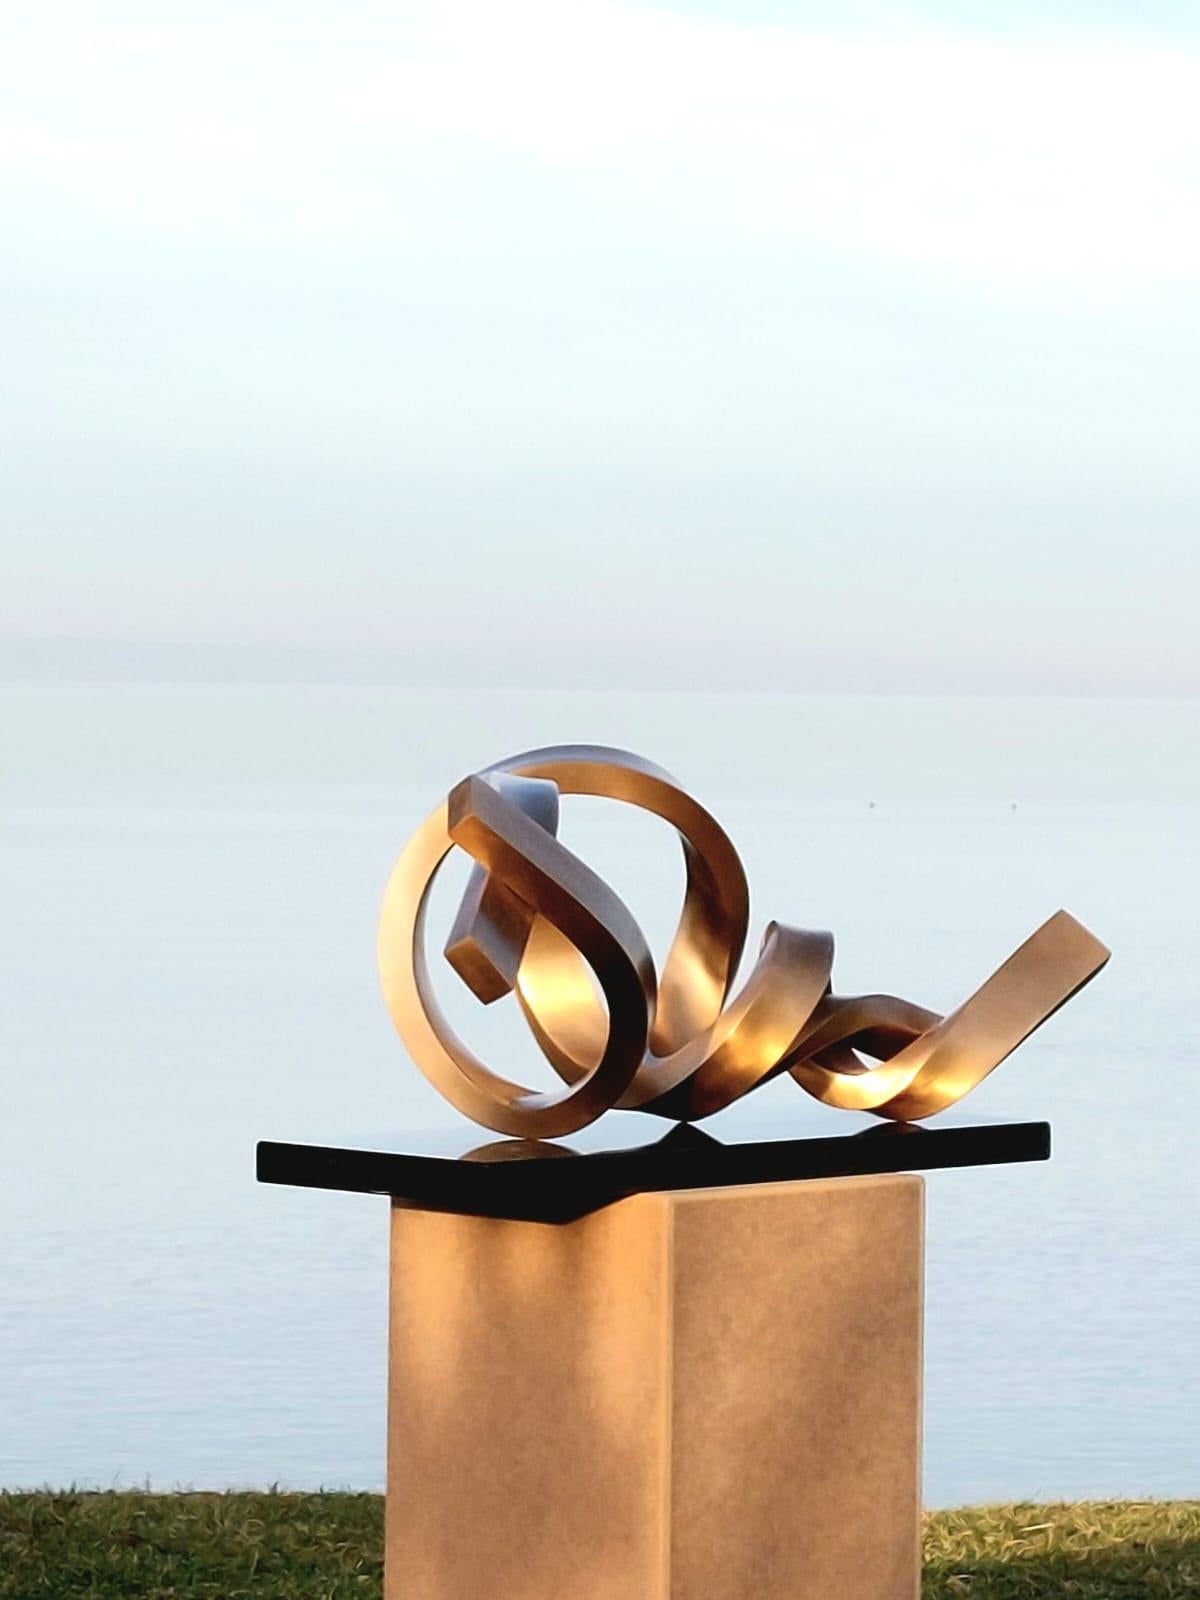 Artist: Kuno Vollet

Title: Infinitum Big

This elegant original cast bronze sculpture by German artist Kuno Vollet brings energy into any art collection. 
Each sculpture is different and the gold and black is a stunning contrast of colour and is a